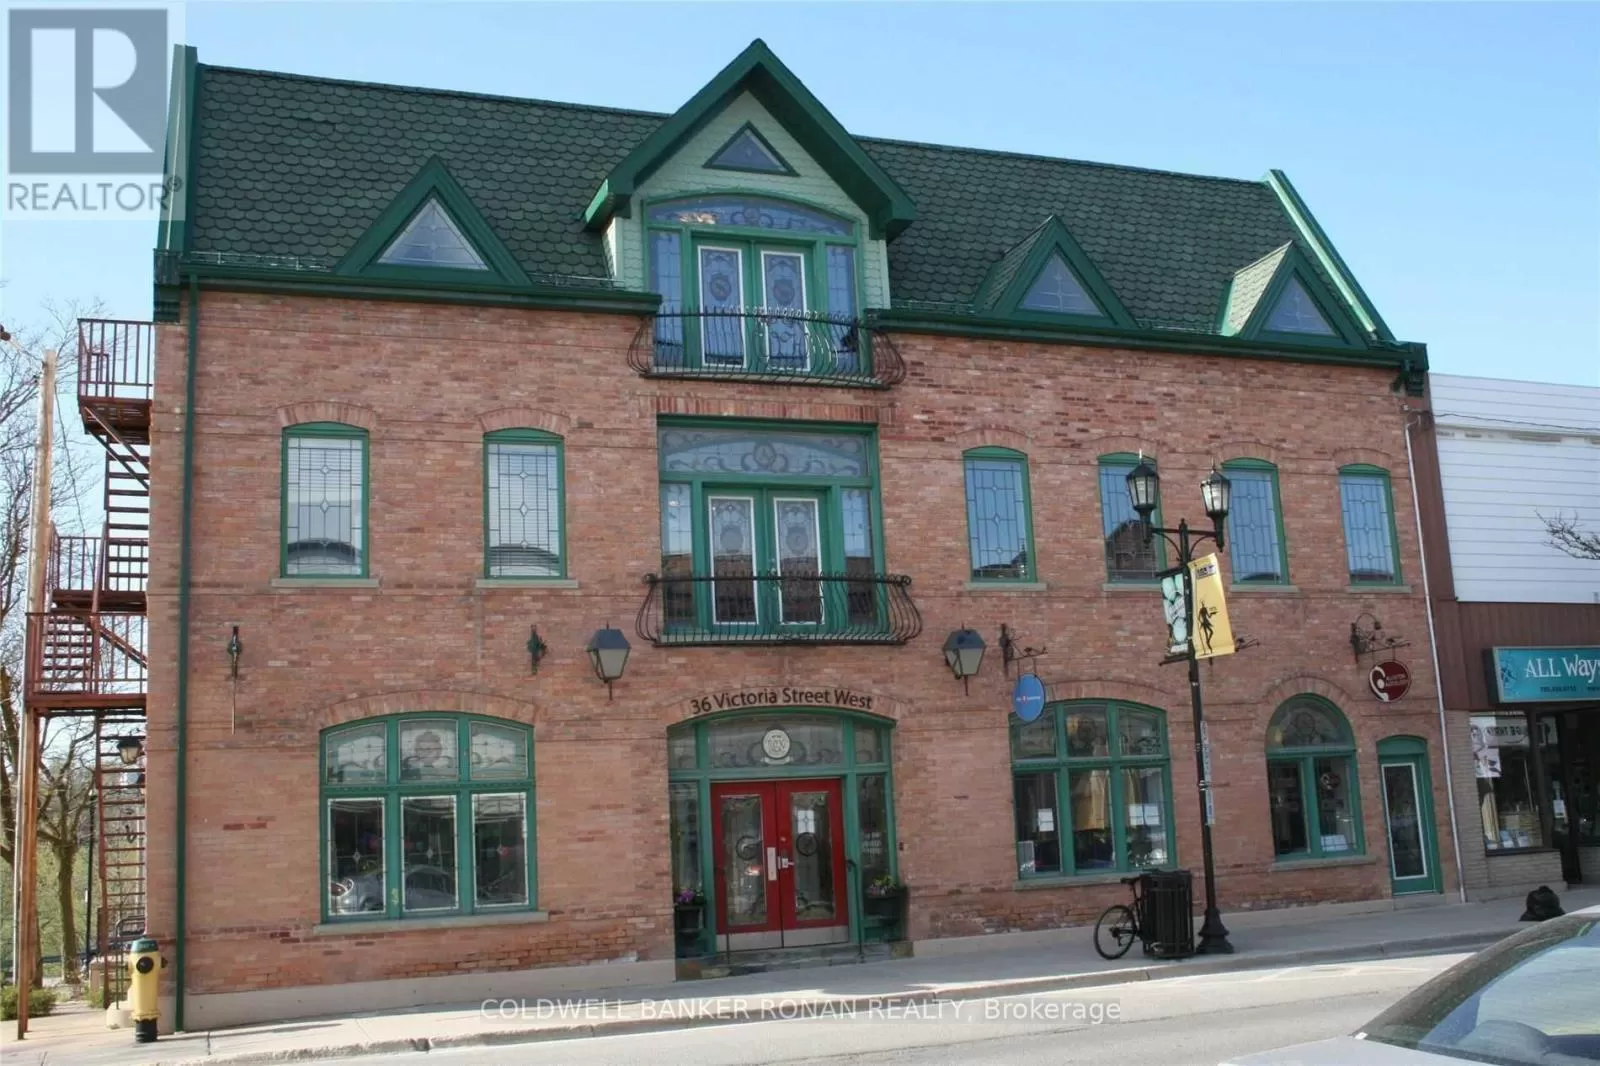 Offices for rent: #305 -36 Victoria St W, New Tecumseth, Ontario L9R 1T3